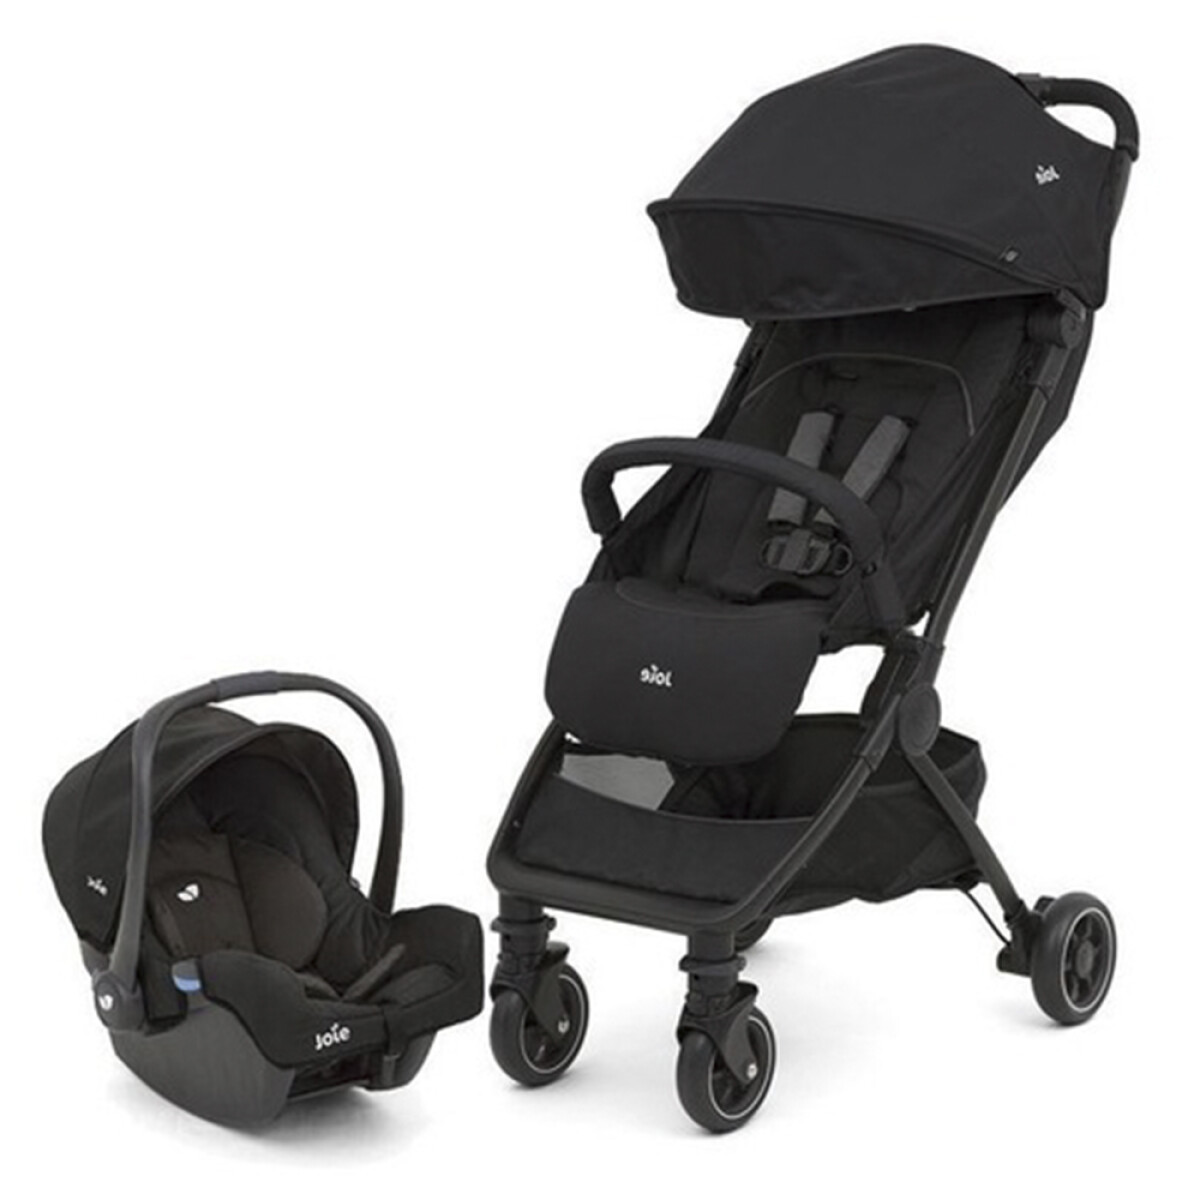 Coche para bebé Pact Travel System JOIE 